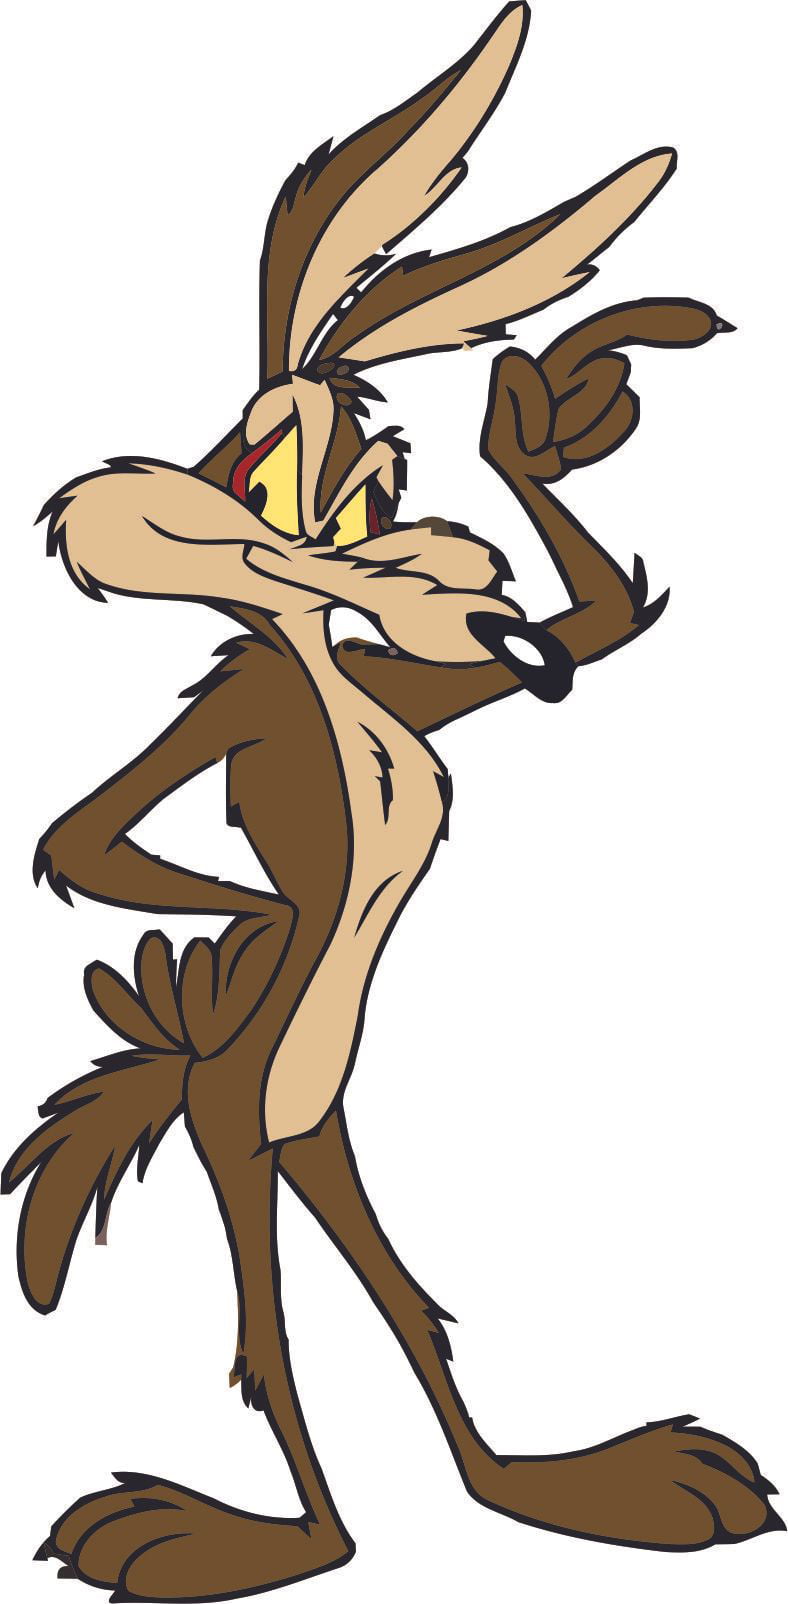 Wile E Coyote Road Runner Cartoon Character Tv Show Wall Sticker Vinyl